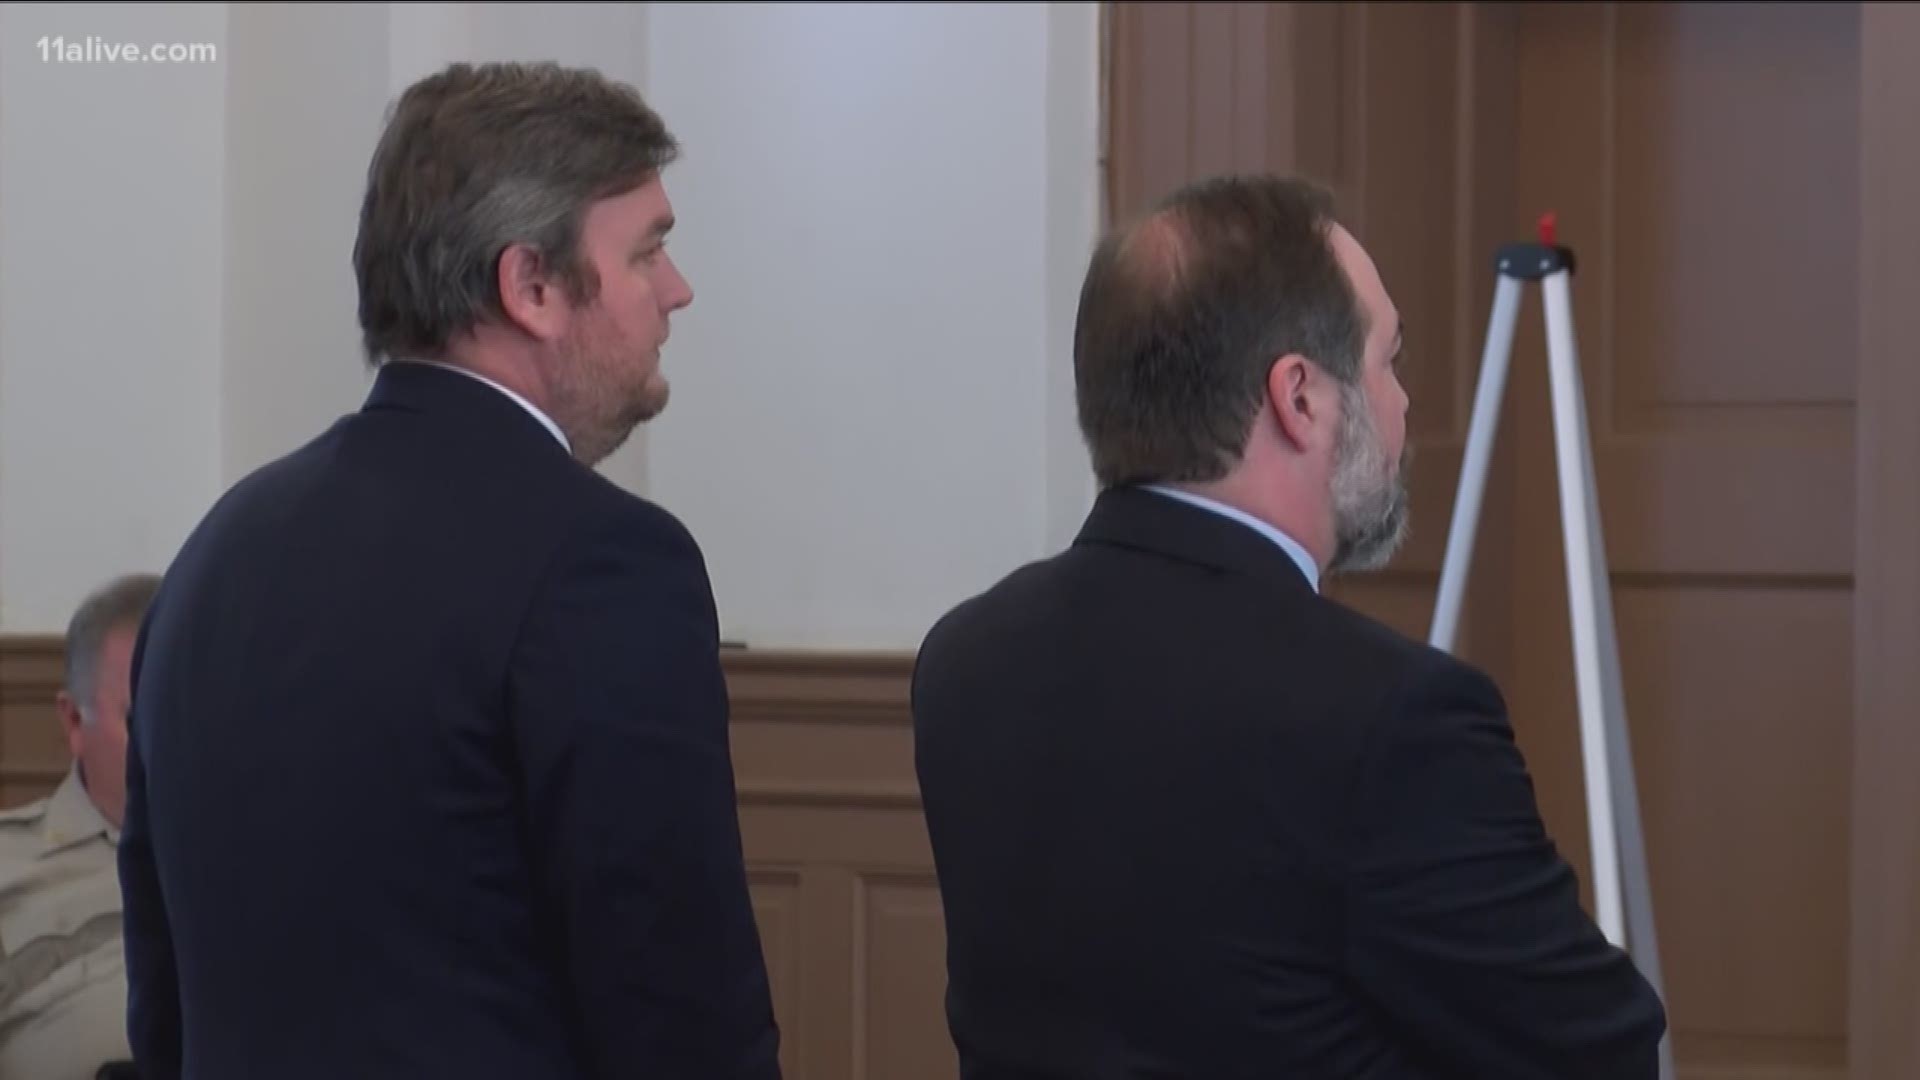 After a four-day trial in Wilcox County Superior Court, a jury found Bo Dukes, one of the men connected to the Tara Grinstead case, guilty of four counts